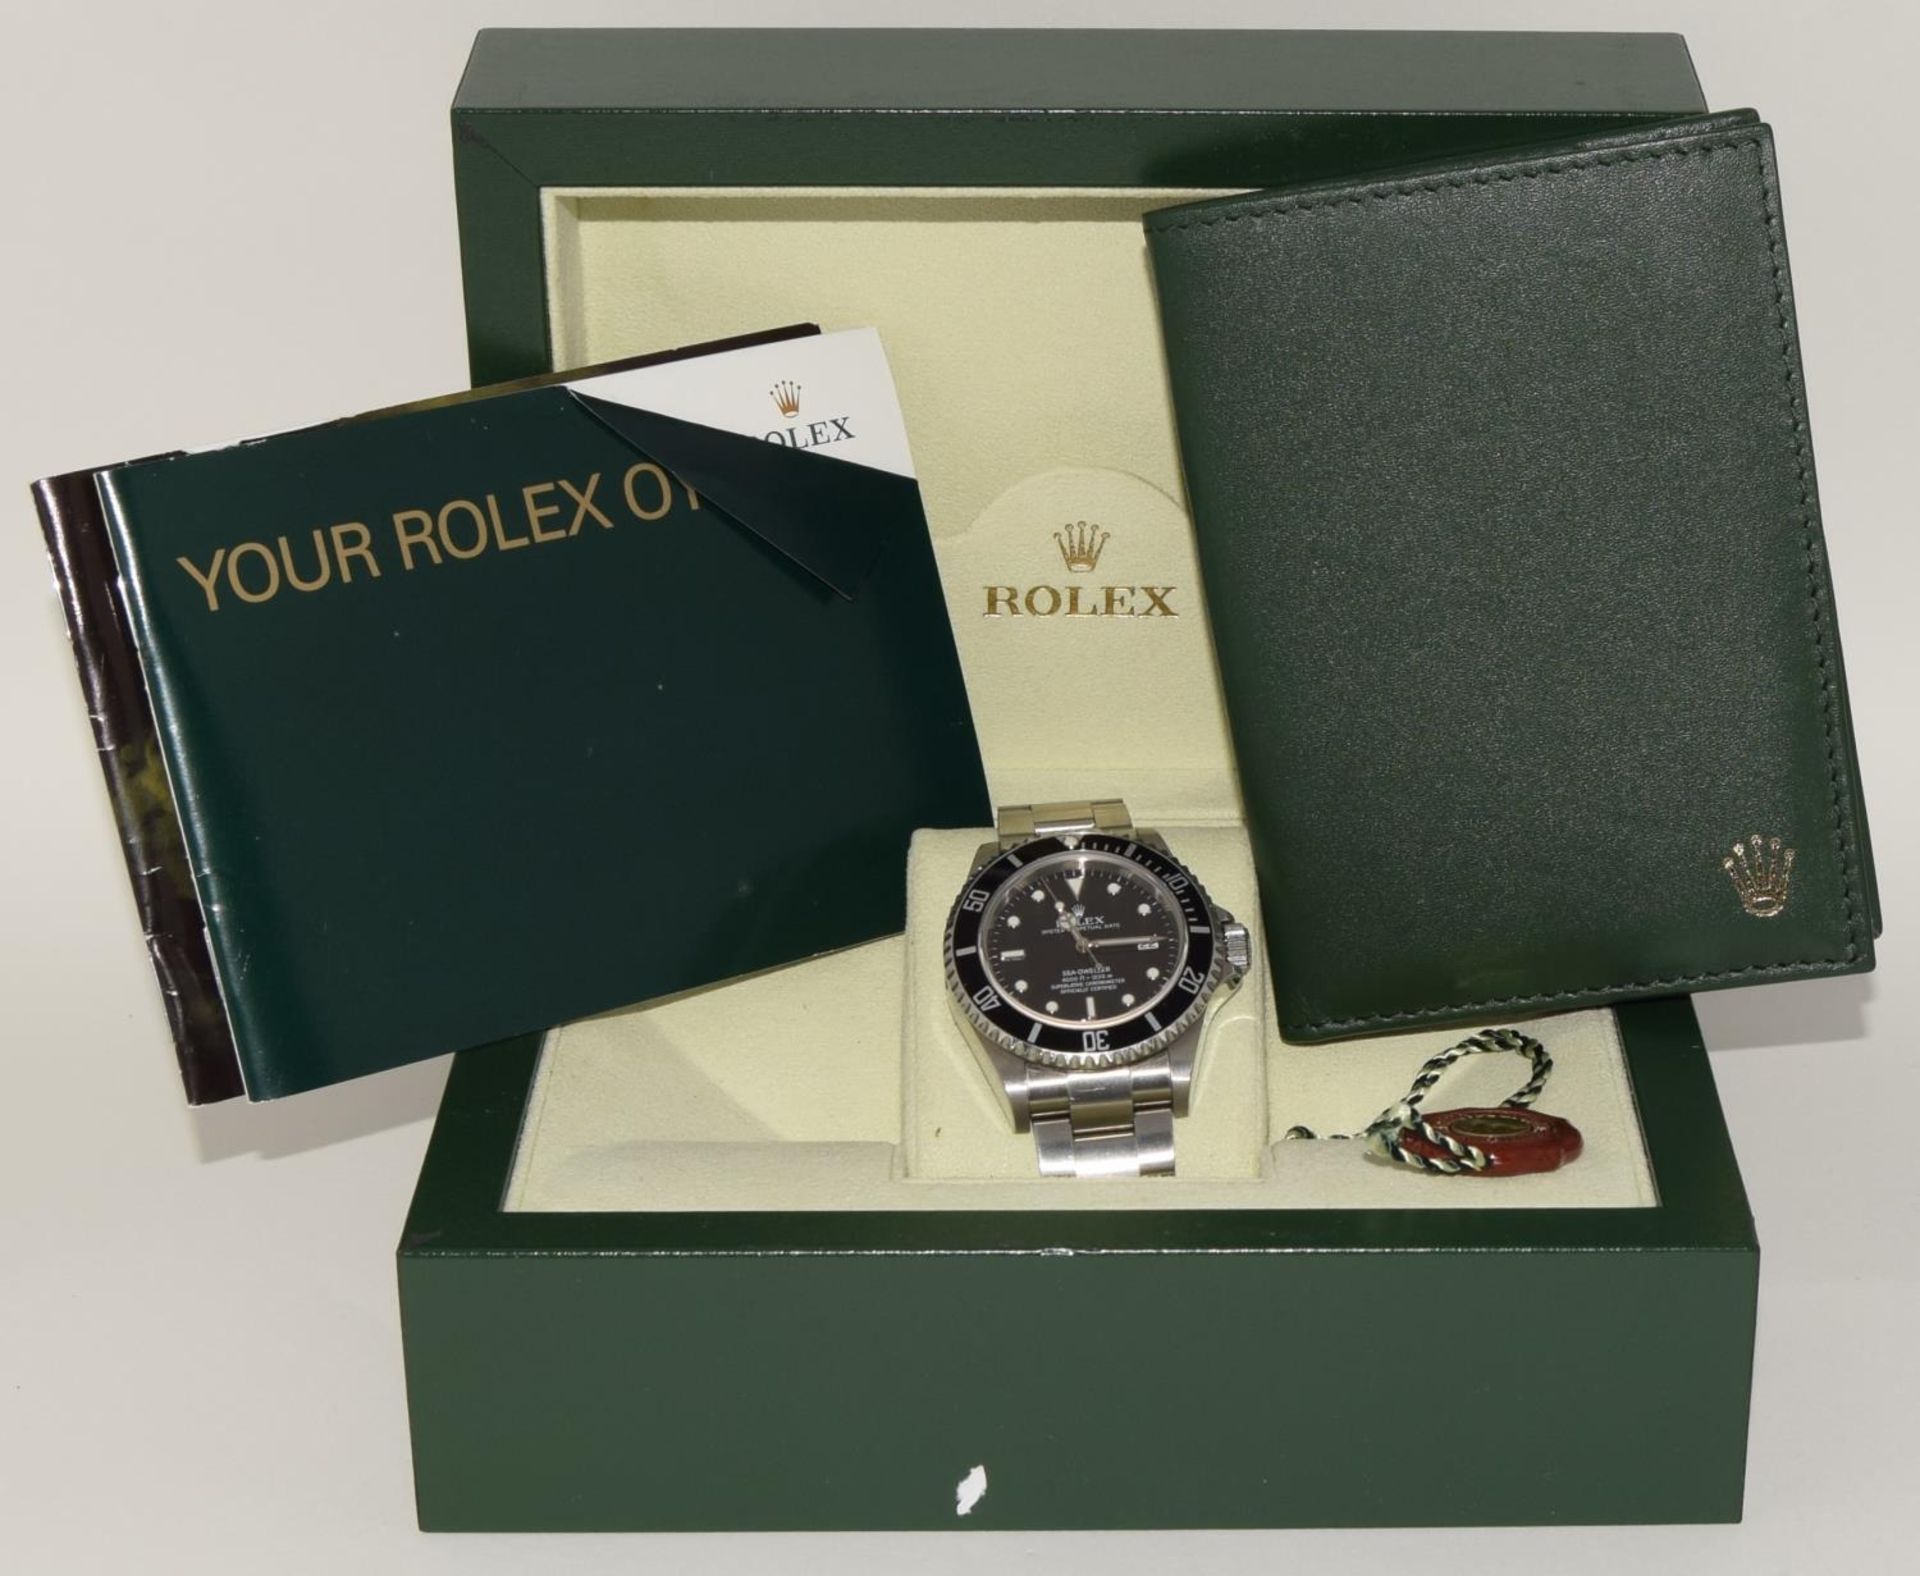 Rolex Sea Dweller mopd-16600, 2006, boxed and papers. (ref 8) - Image 7 of 7